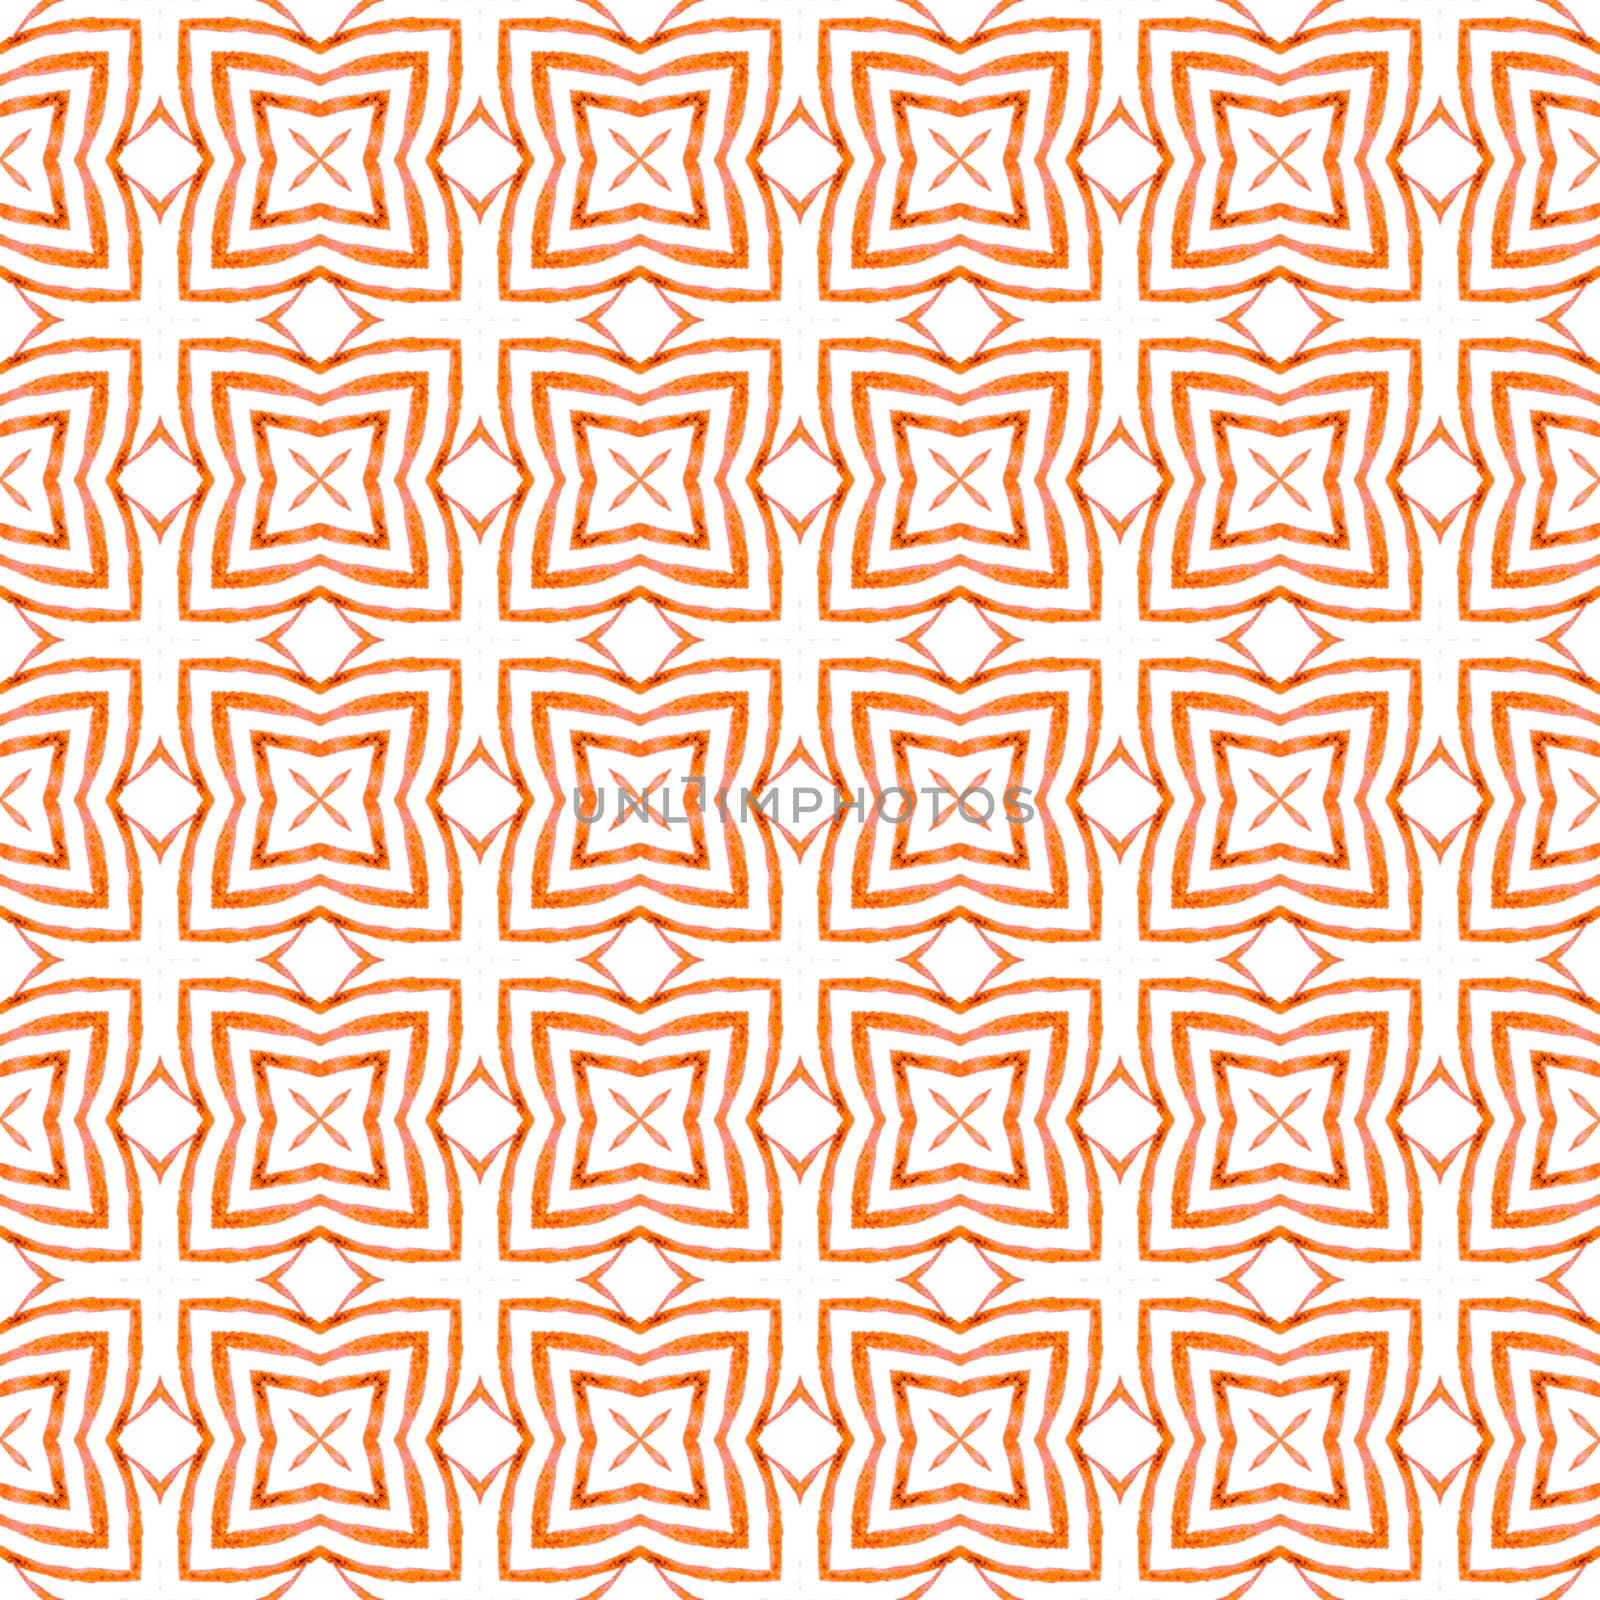 Textile ready nice print, swimwear fabric, wallpaper, wrapping. Orange classy boho chic summer design. Hand painted tiled watercolor border. Tiled watercolor background.